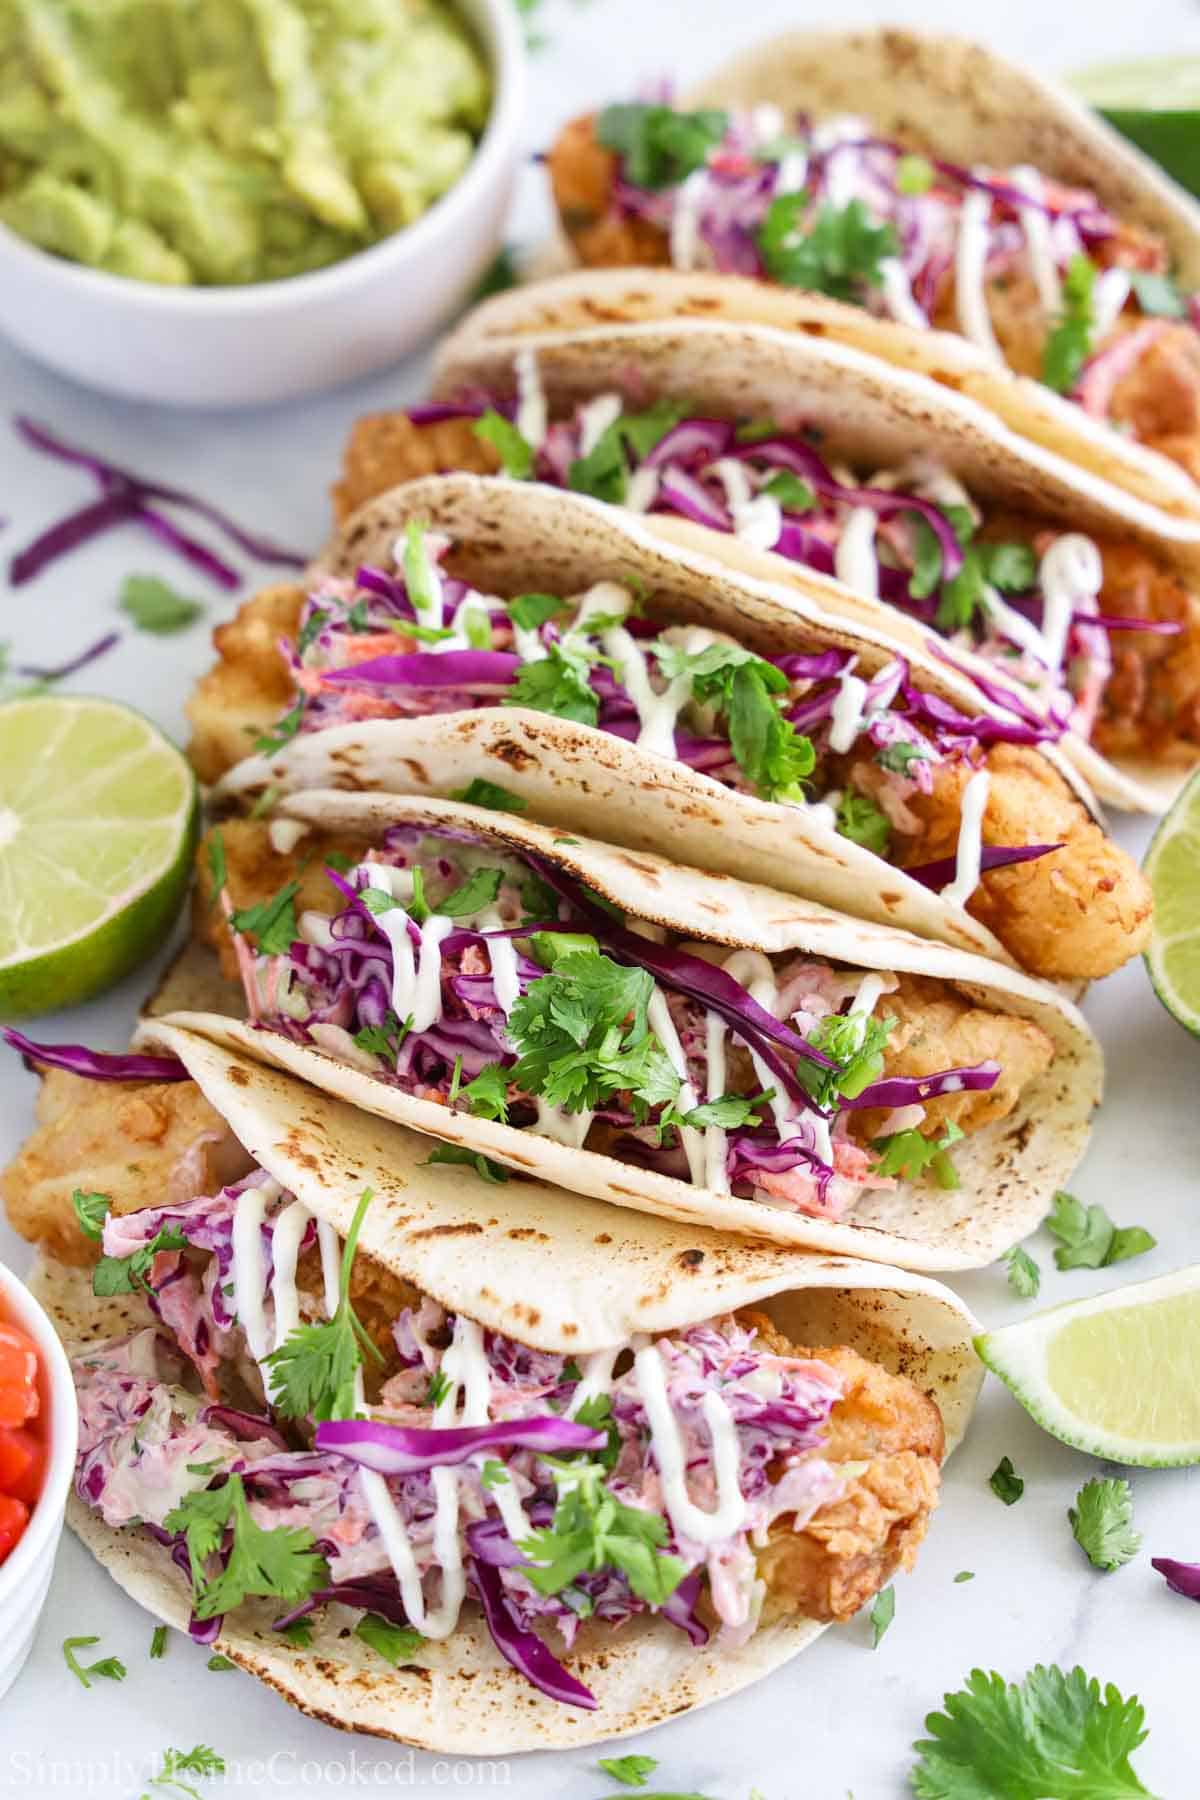 Row of Fish Tacos with limes on the side